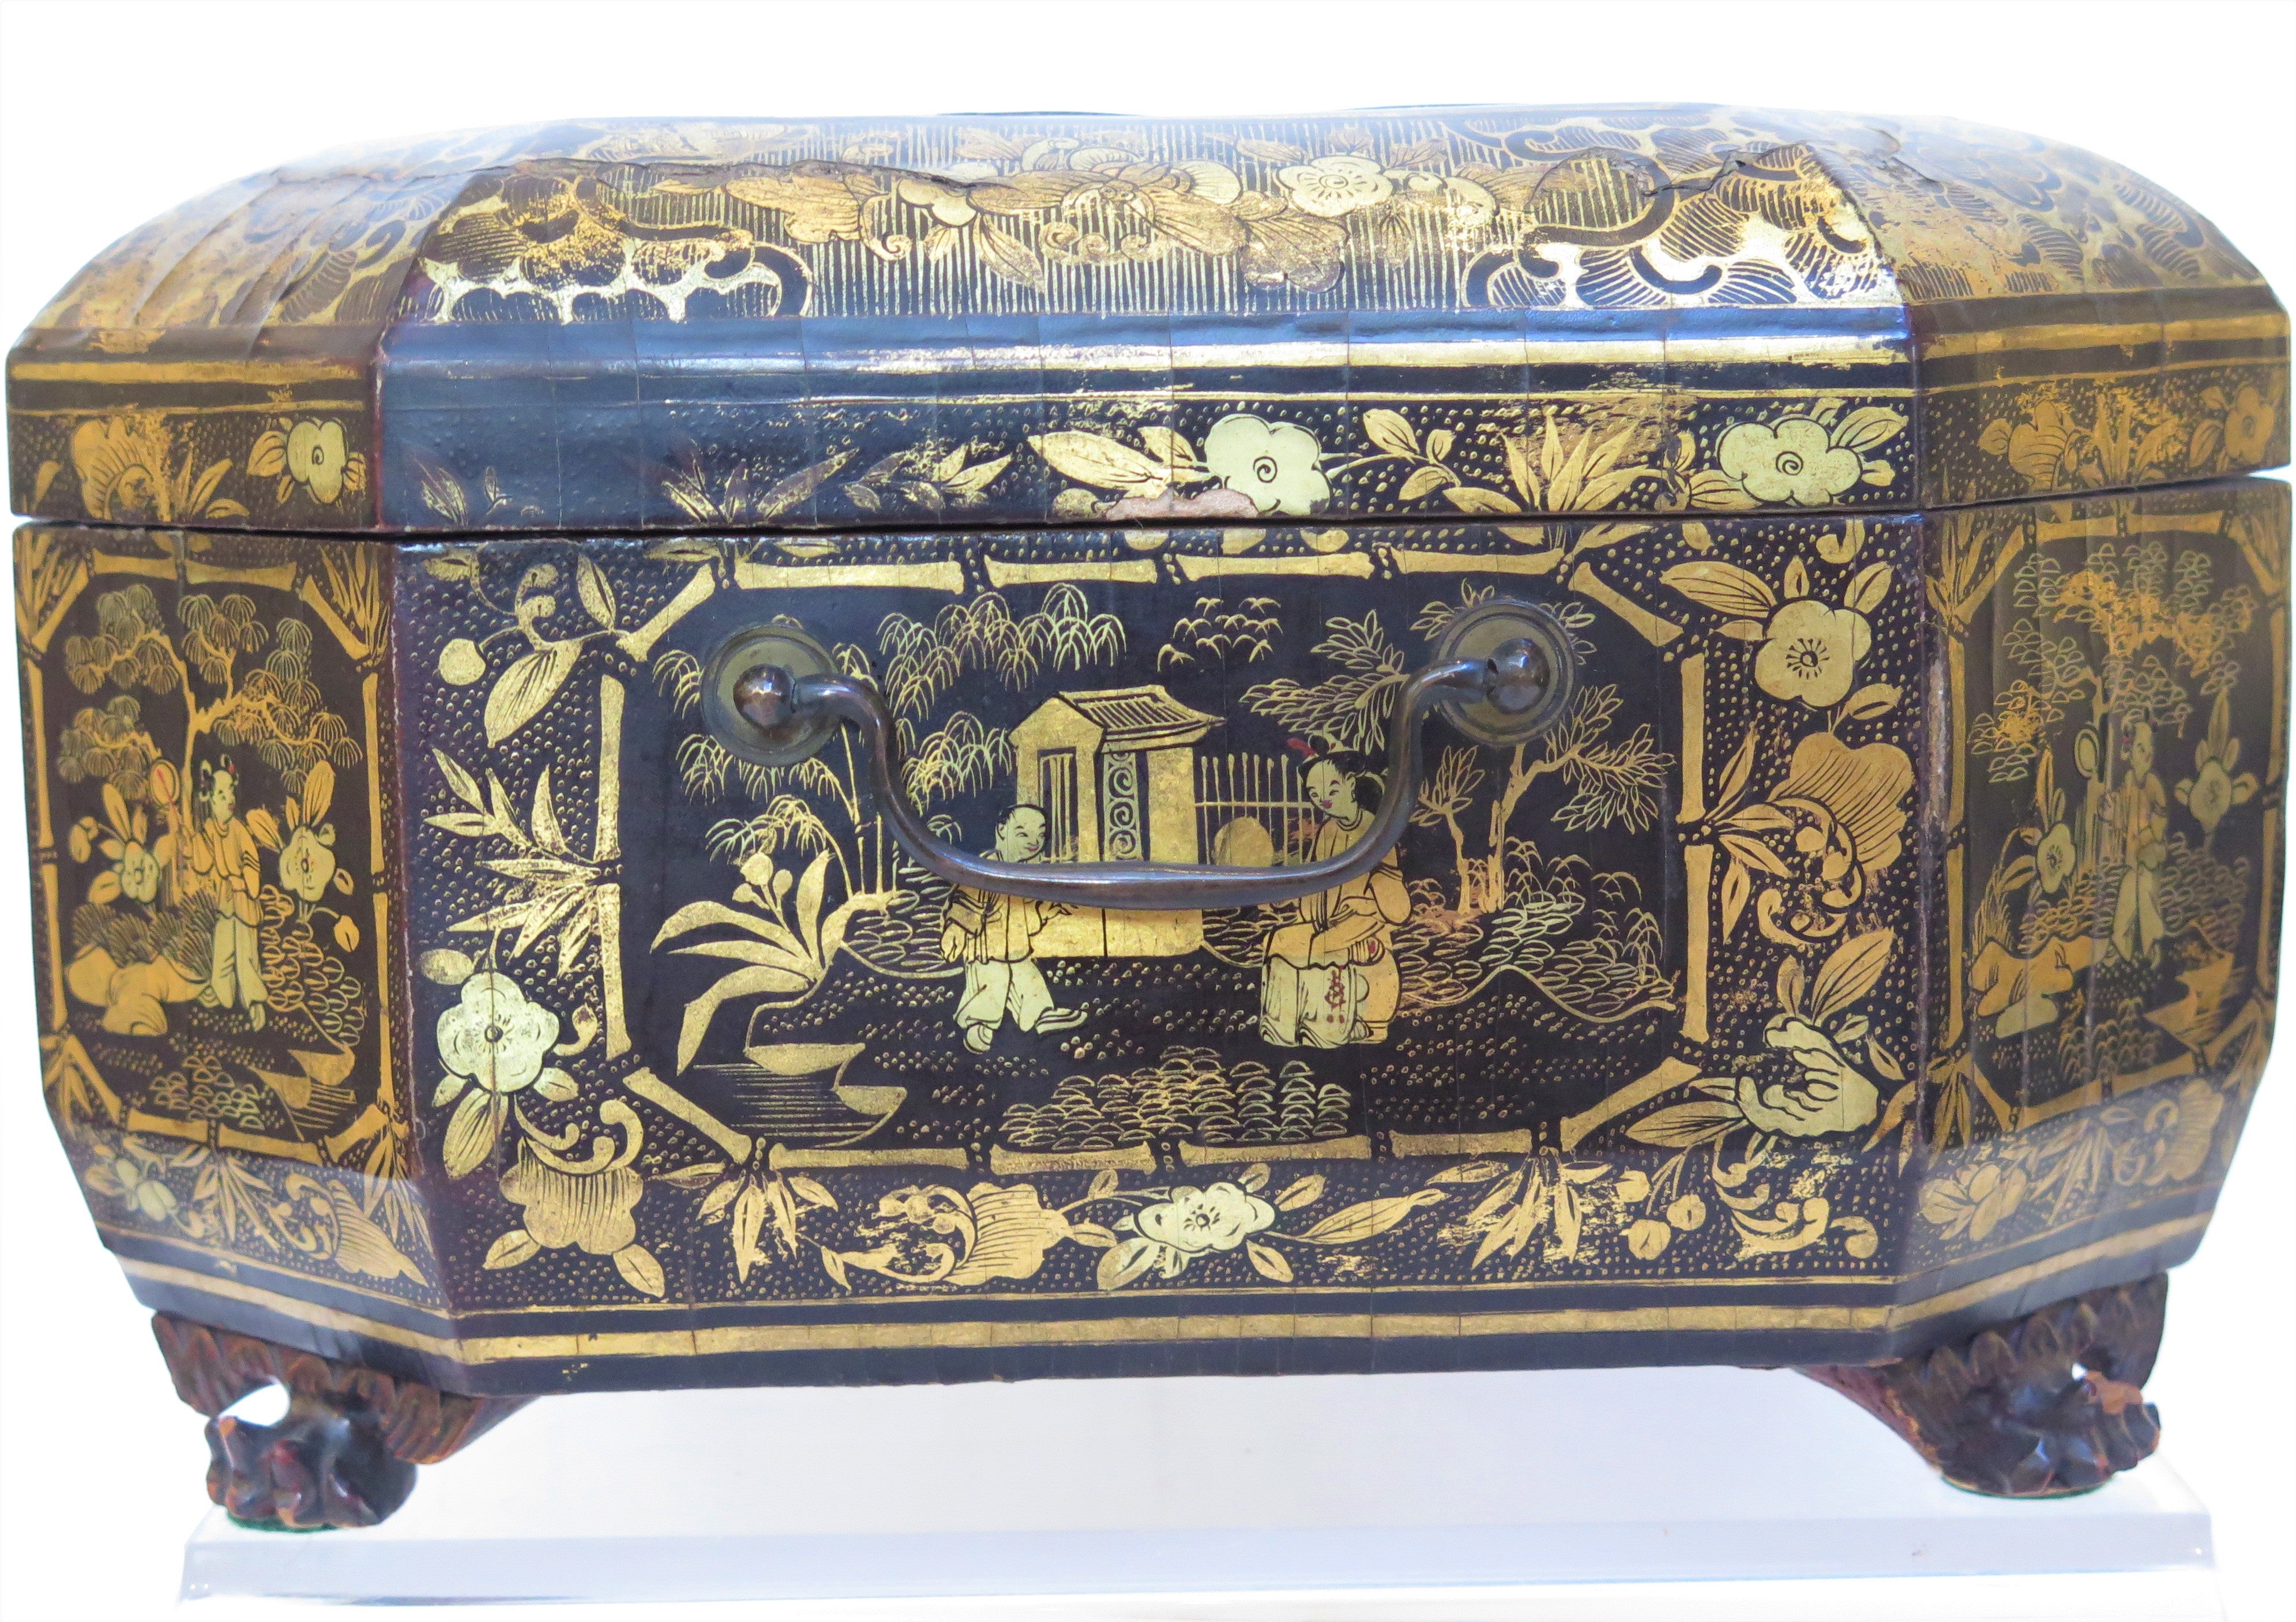 Ealy 19th Century Chinese Export Lacquer Sewing Box